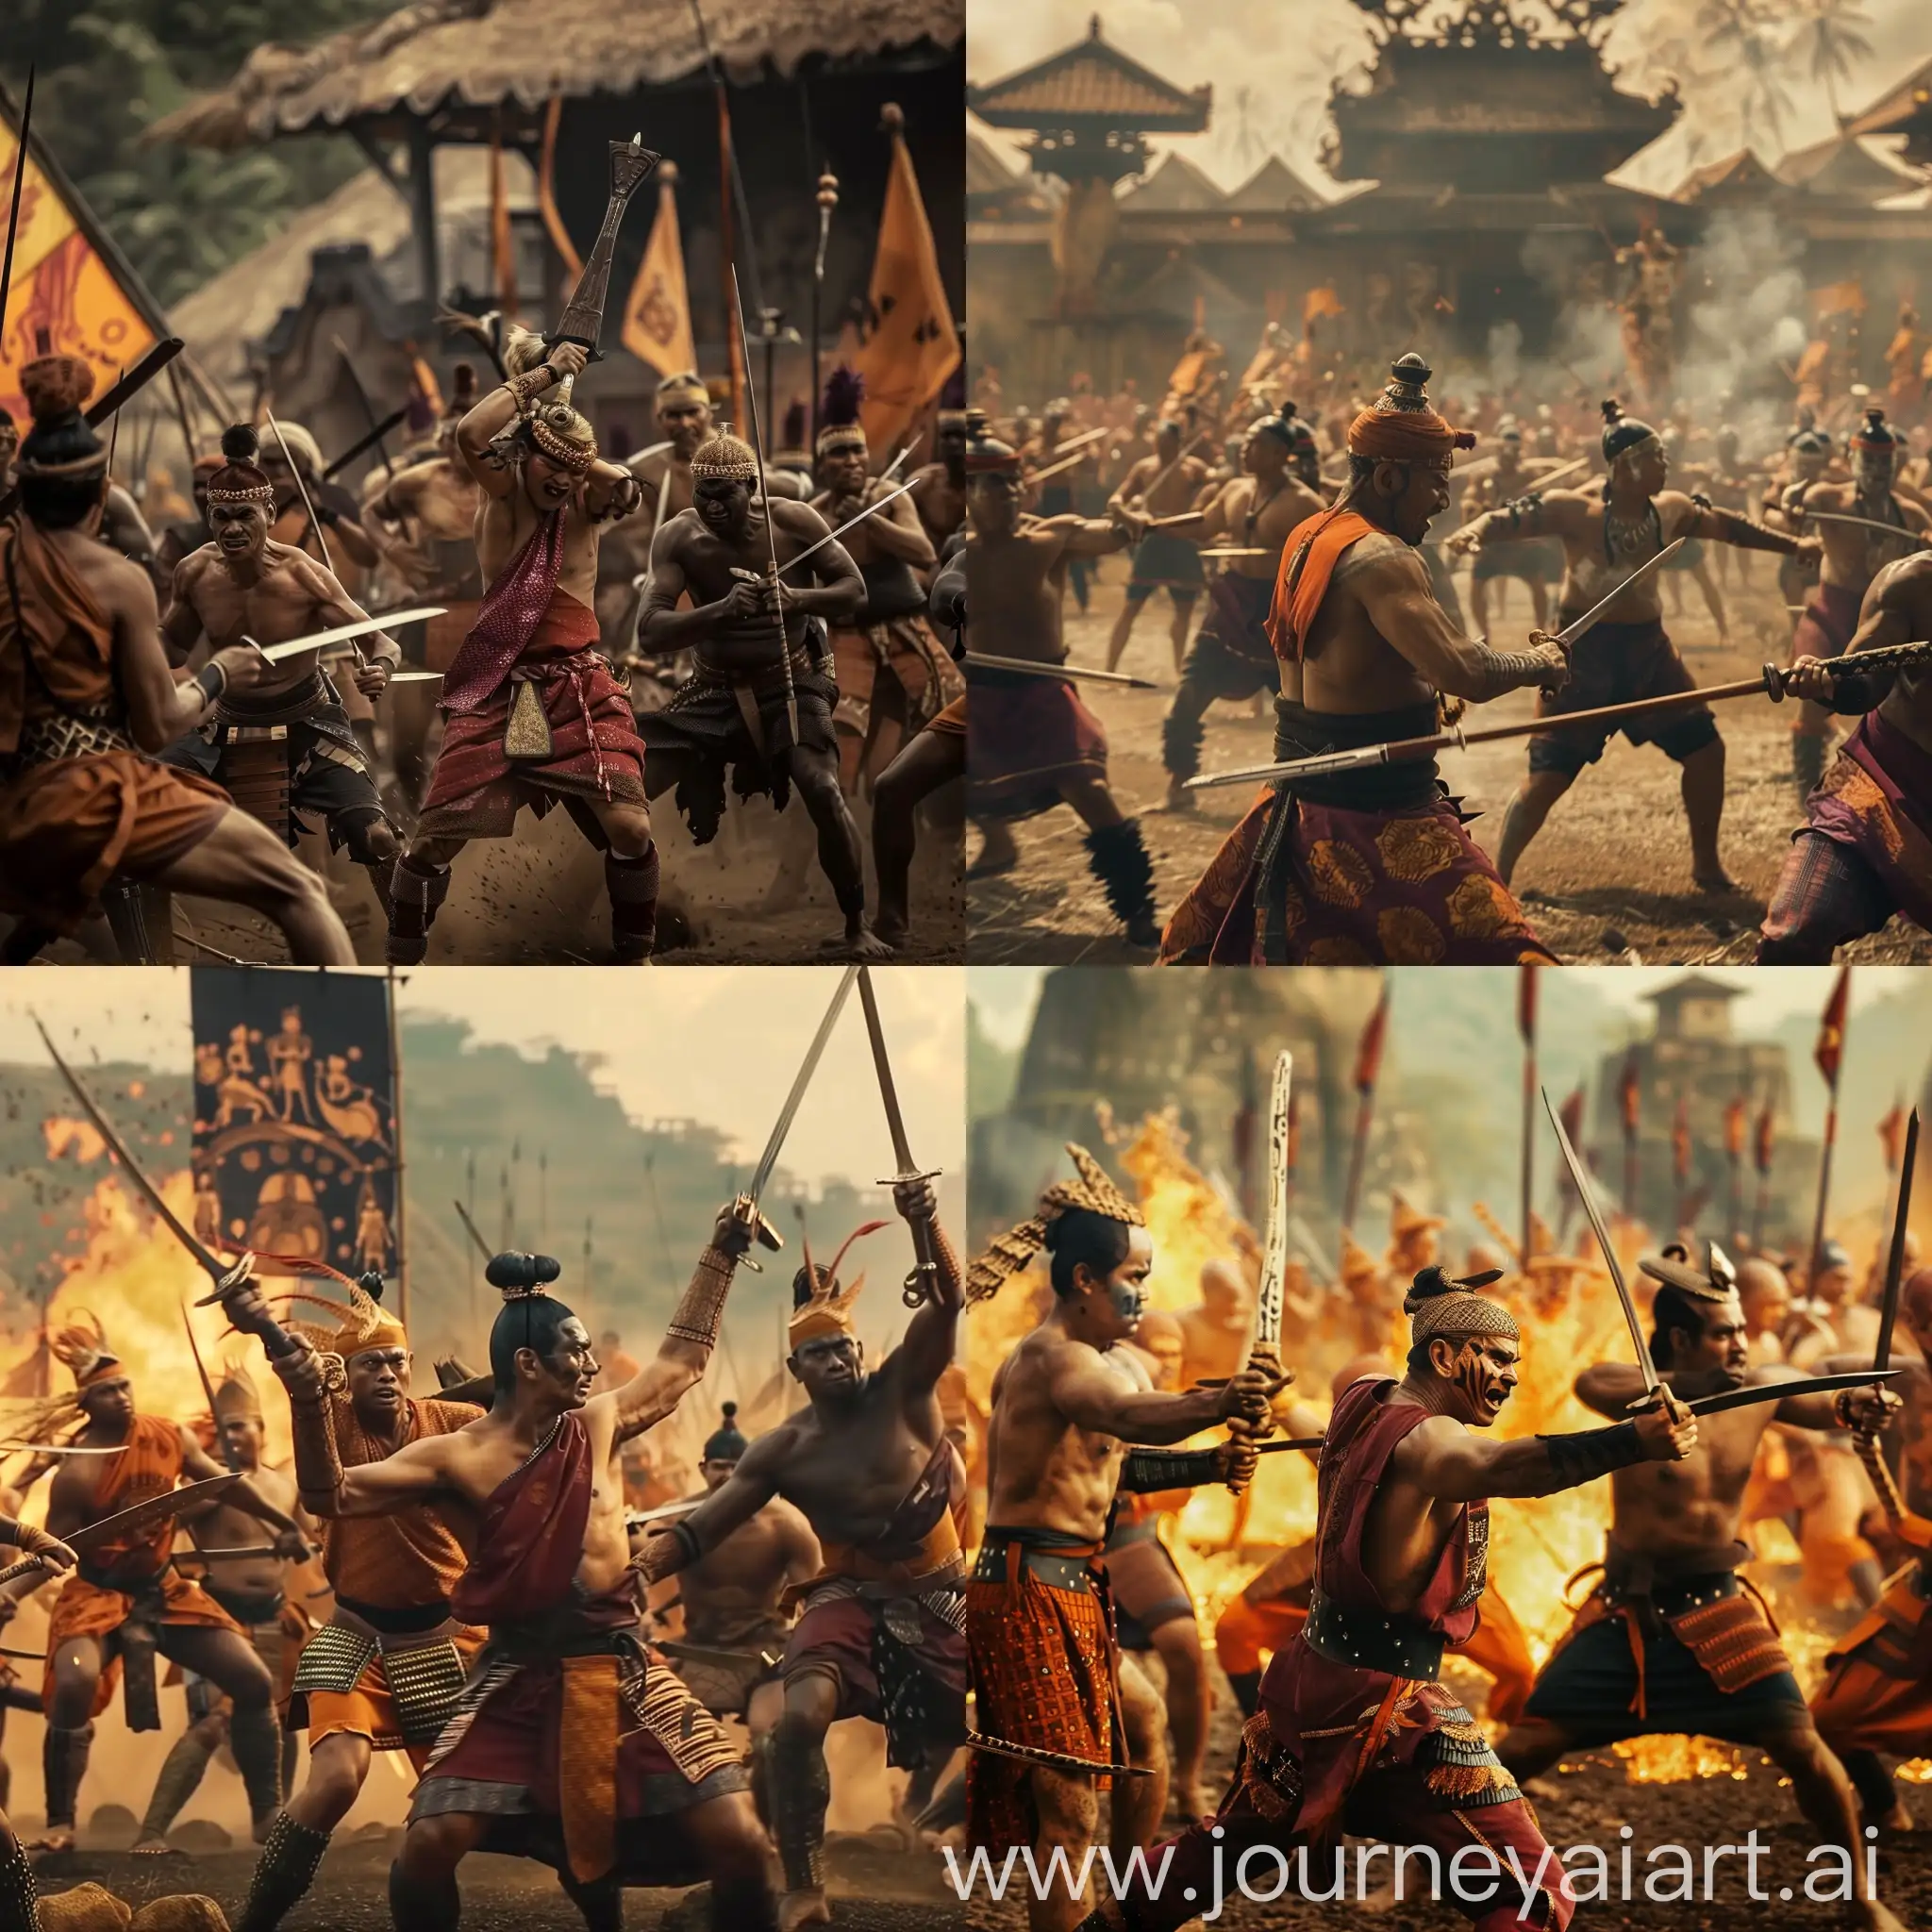 Majapahit-Kingdom-Battle-Scene-with-Fighters-in-Traditional-Attire